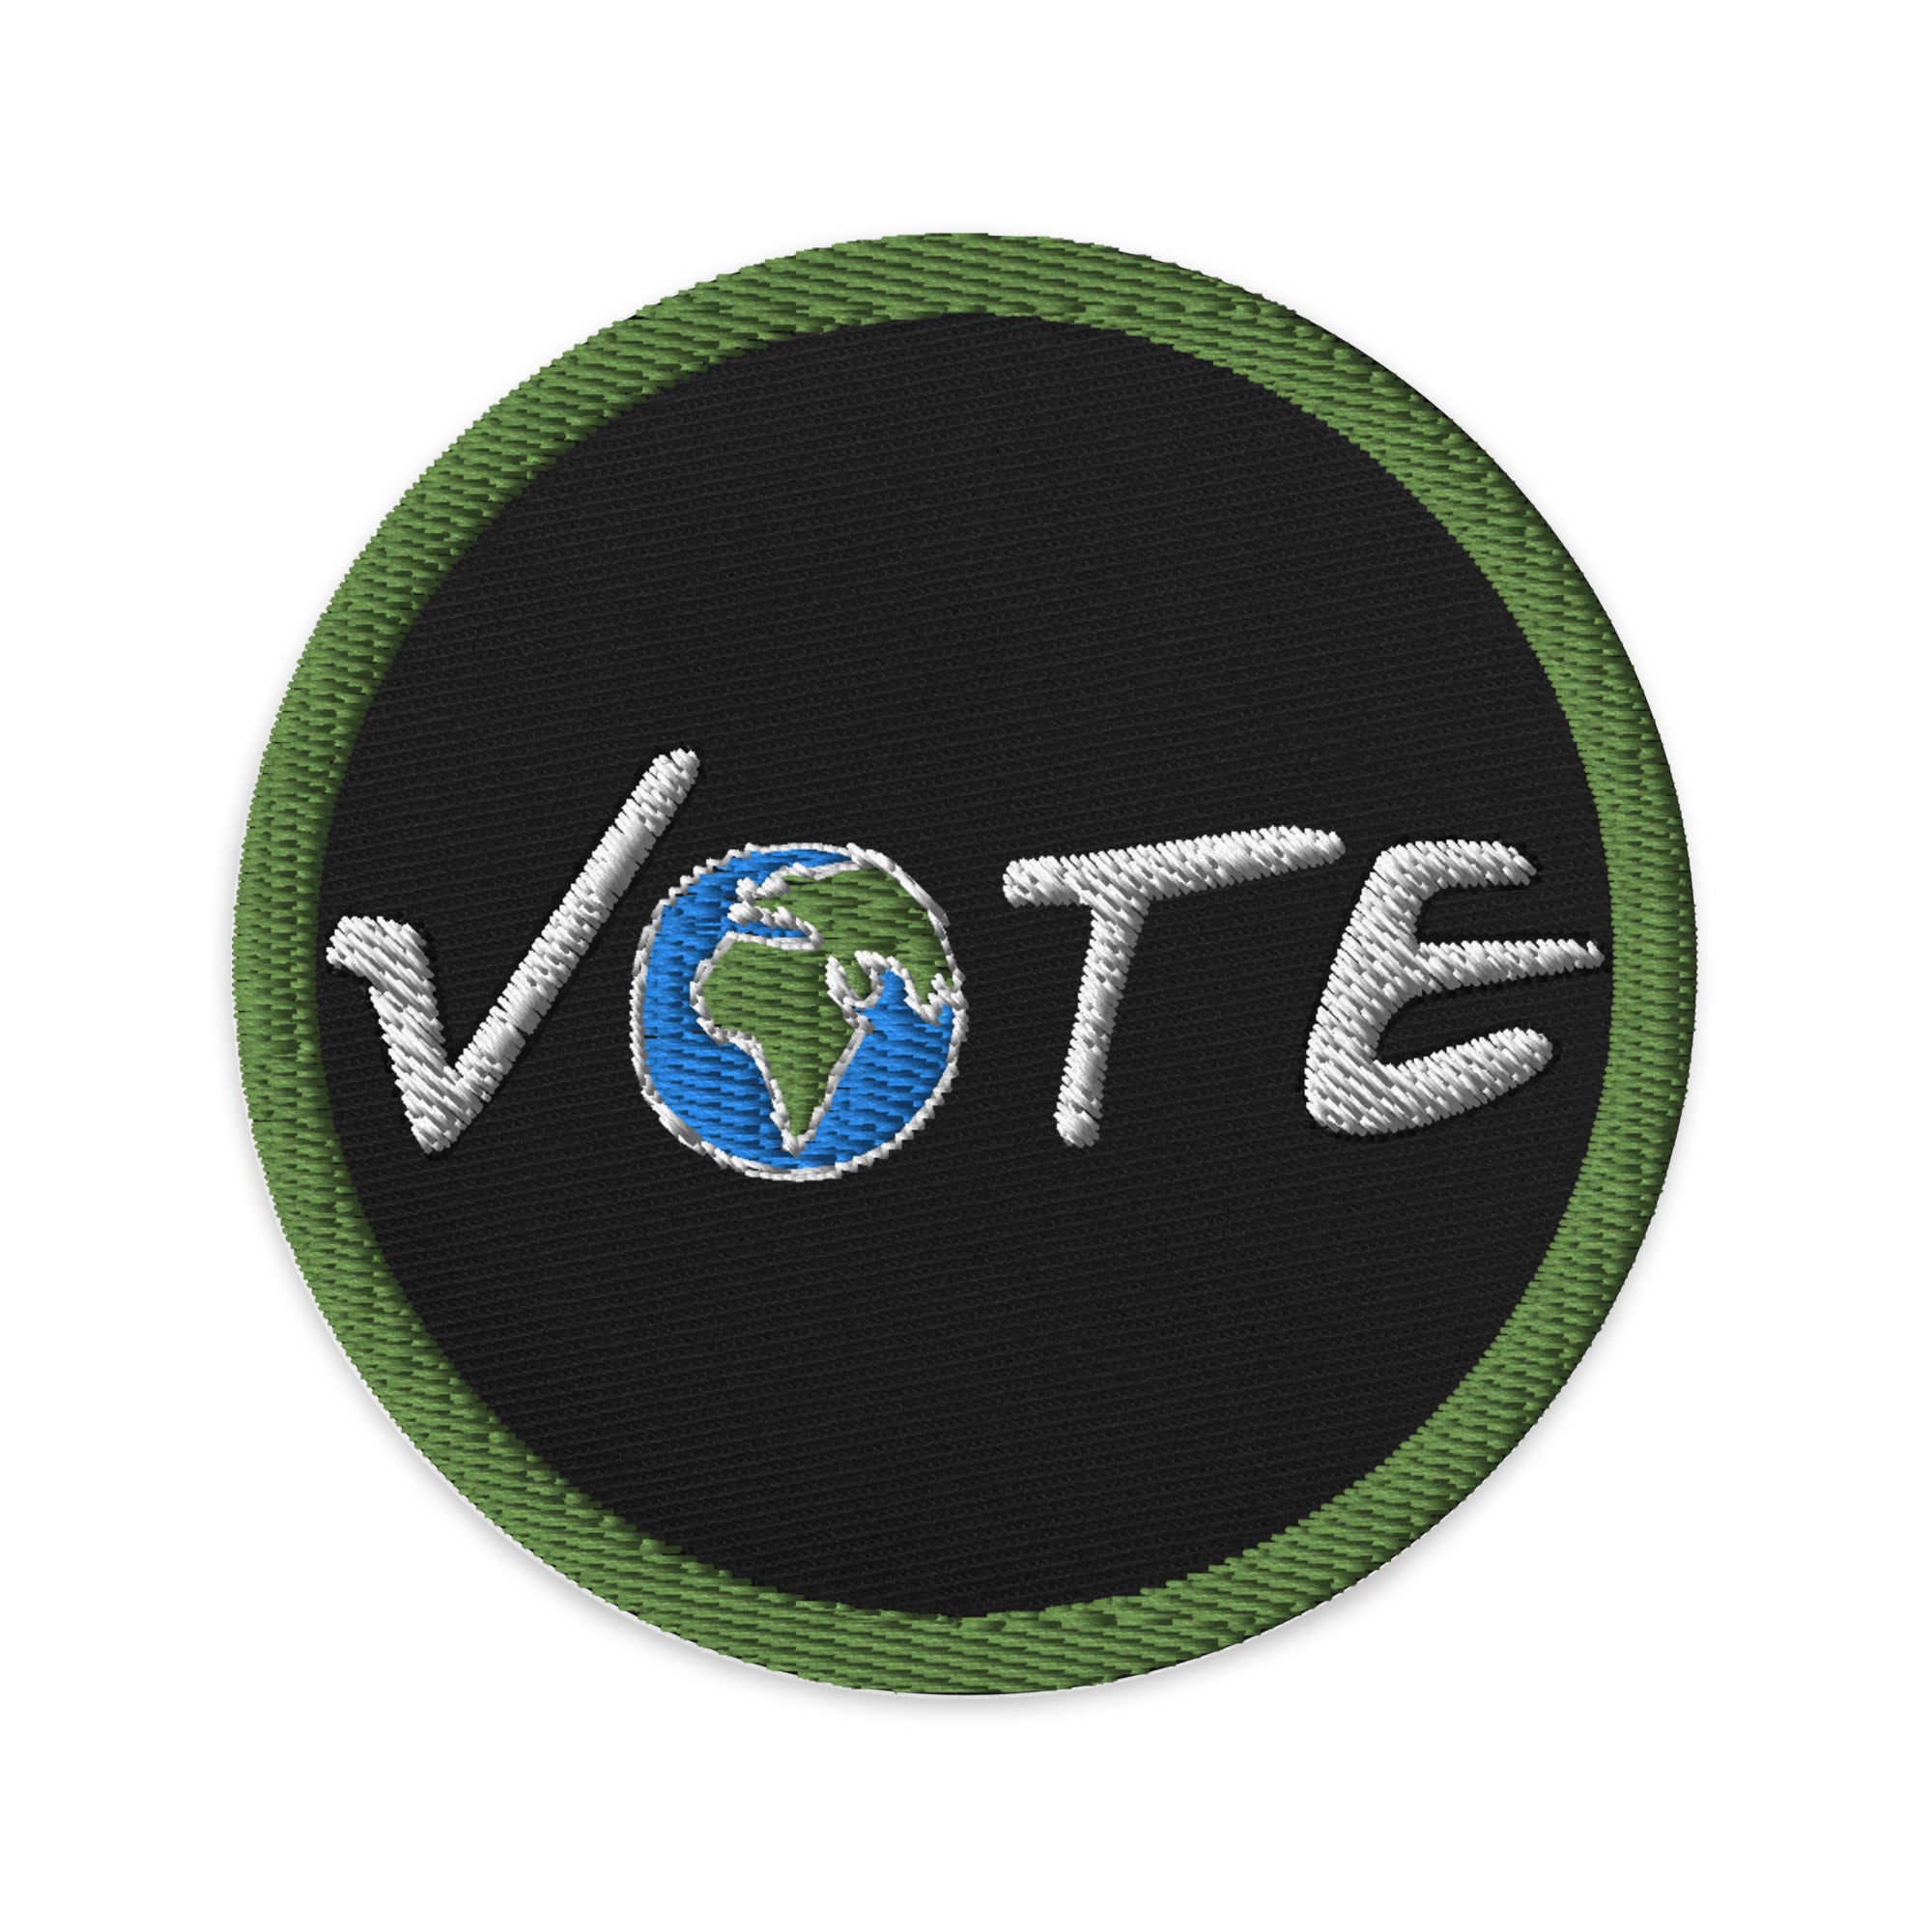 VOTE EARTH- Embroidered patches